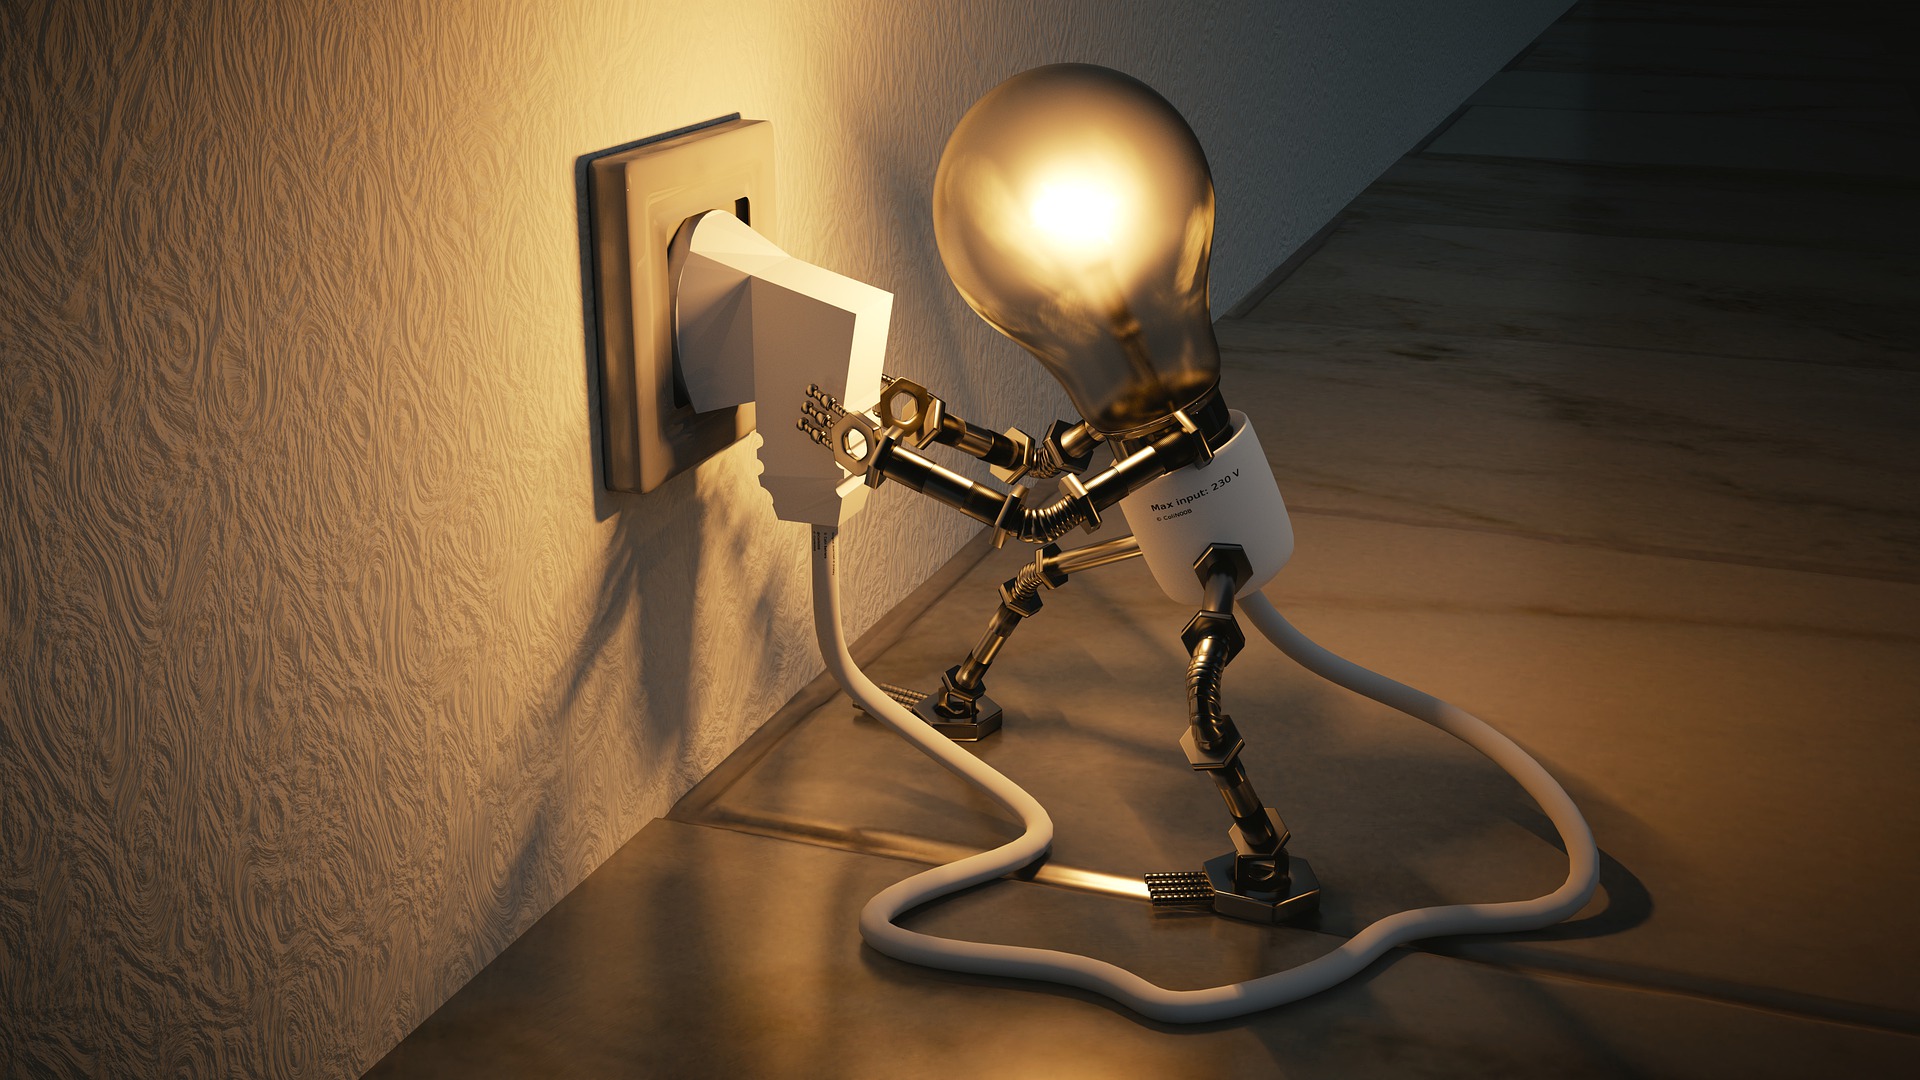 Light bulb plugged in